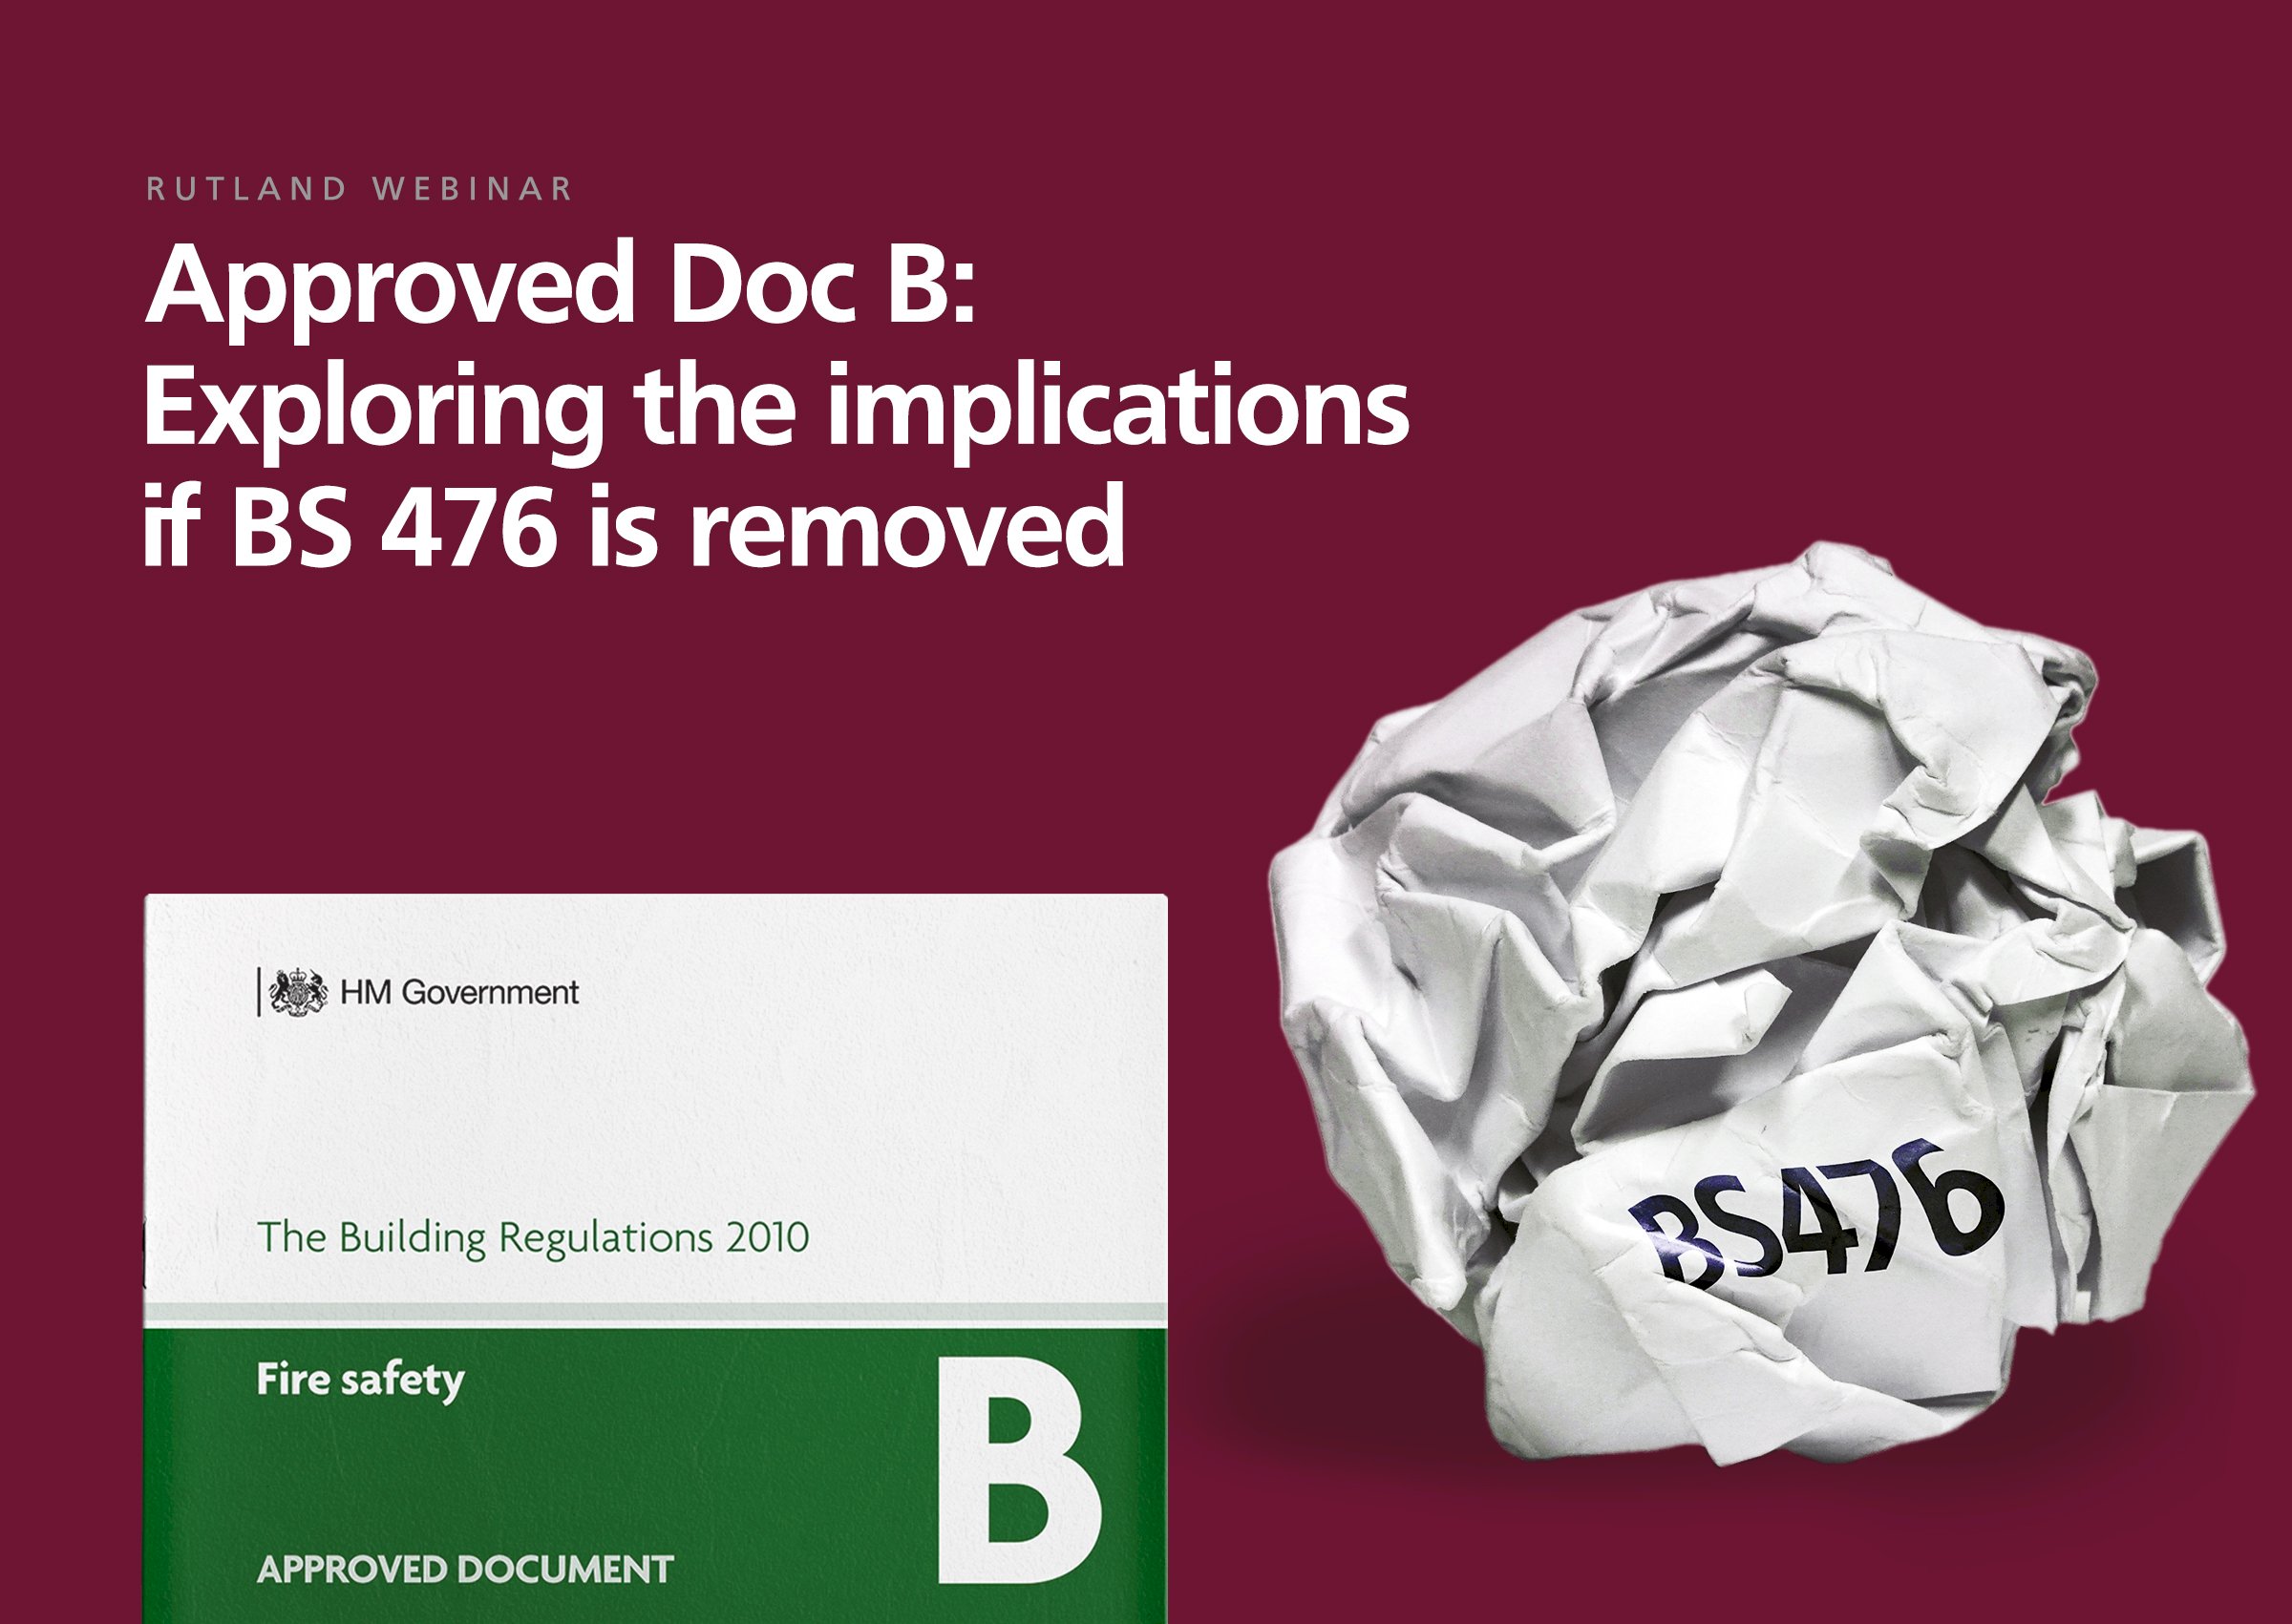 Webinar: Approved Doc B: Exploring implications if BS 476 is removed